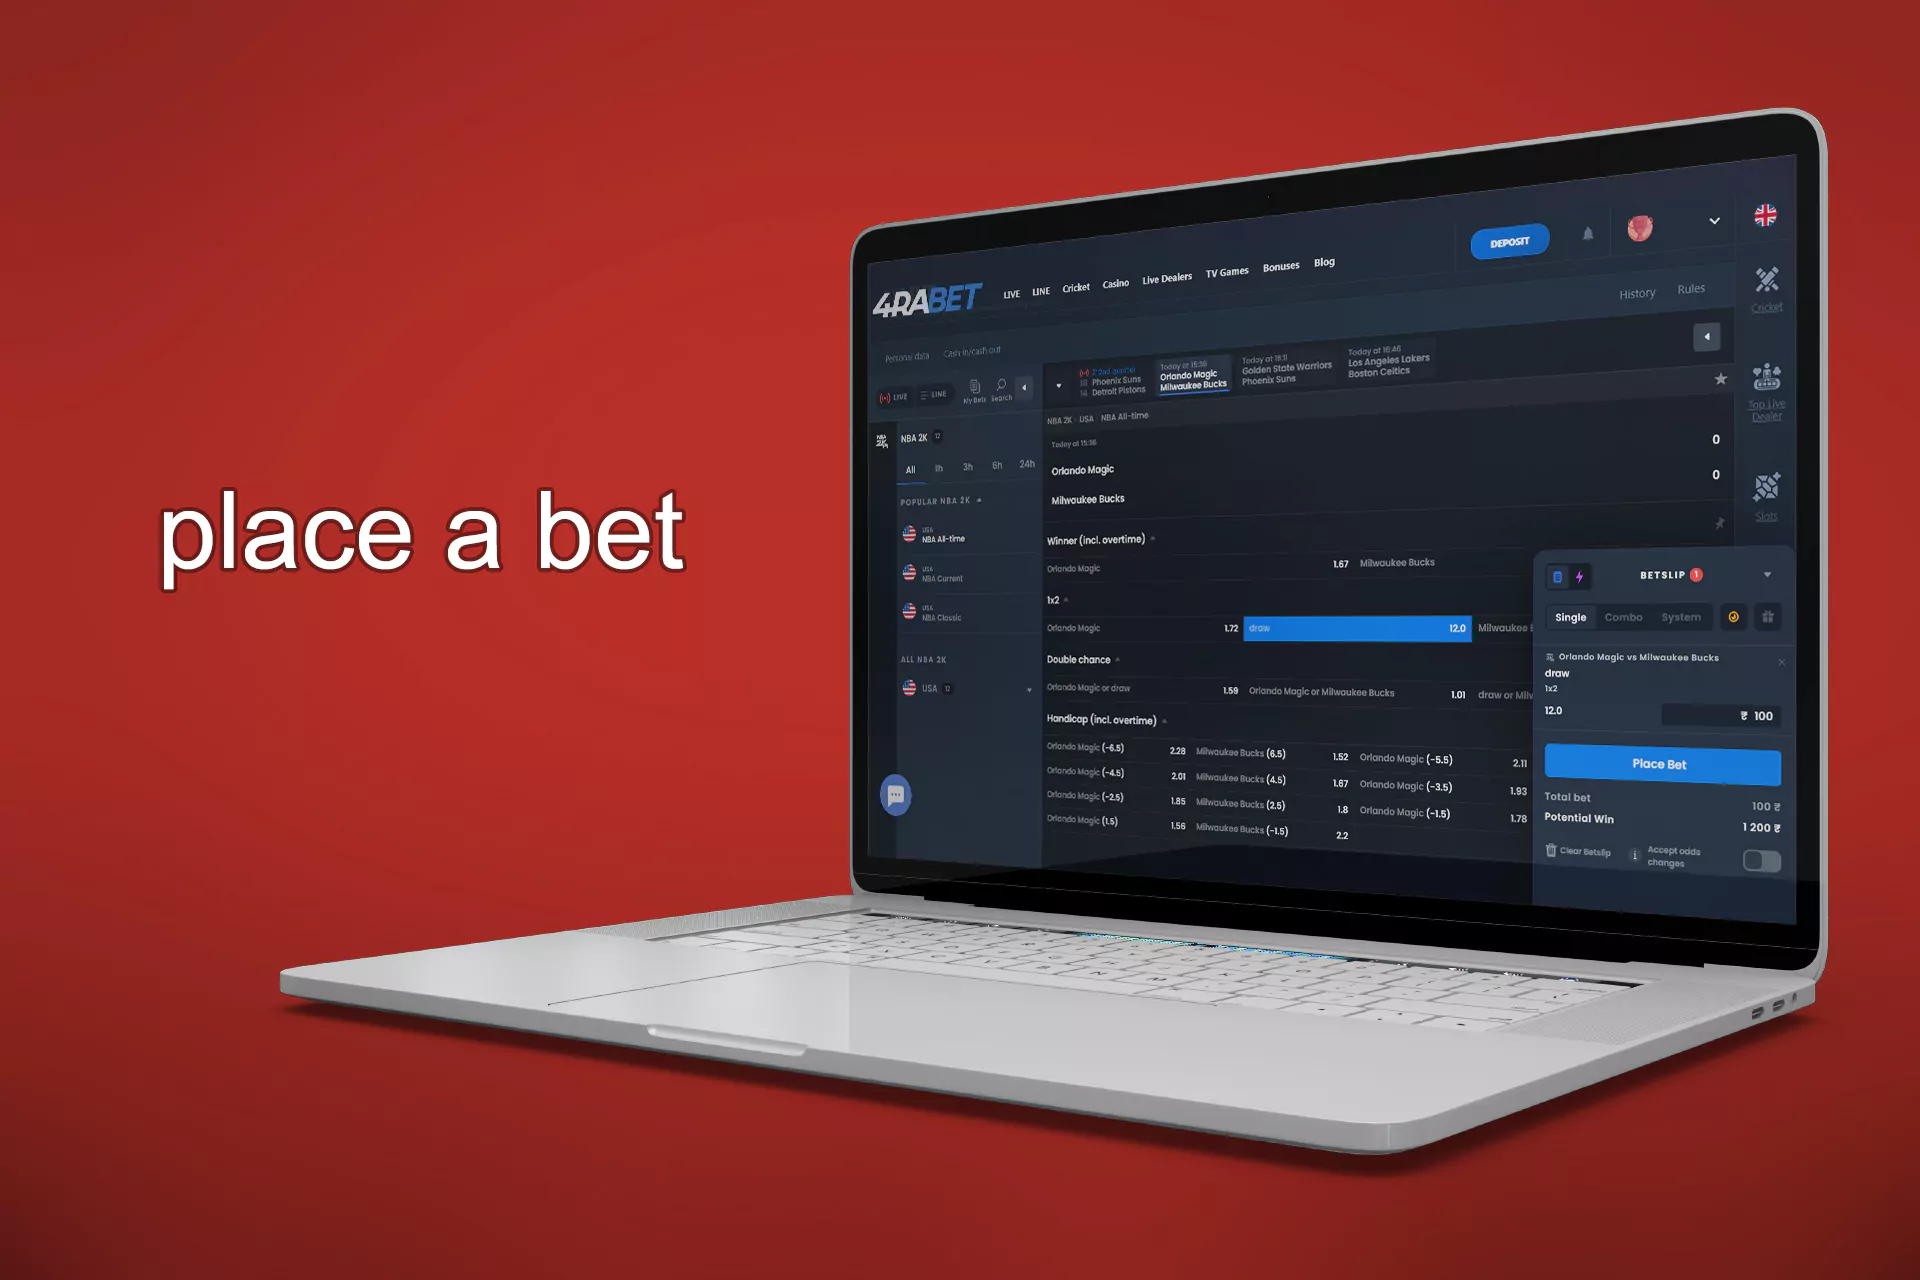 Choose an outcome and place a bet by clicking on the blue button.